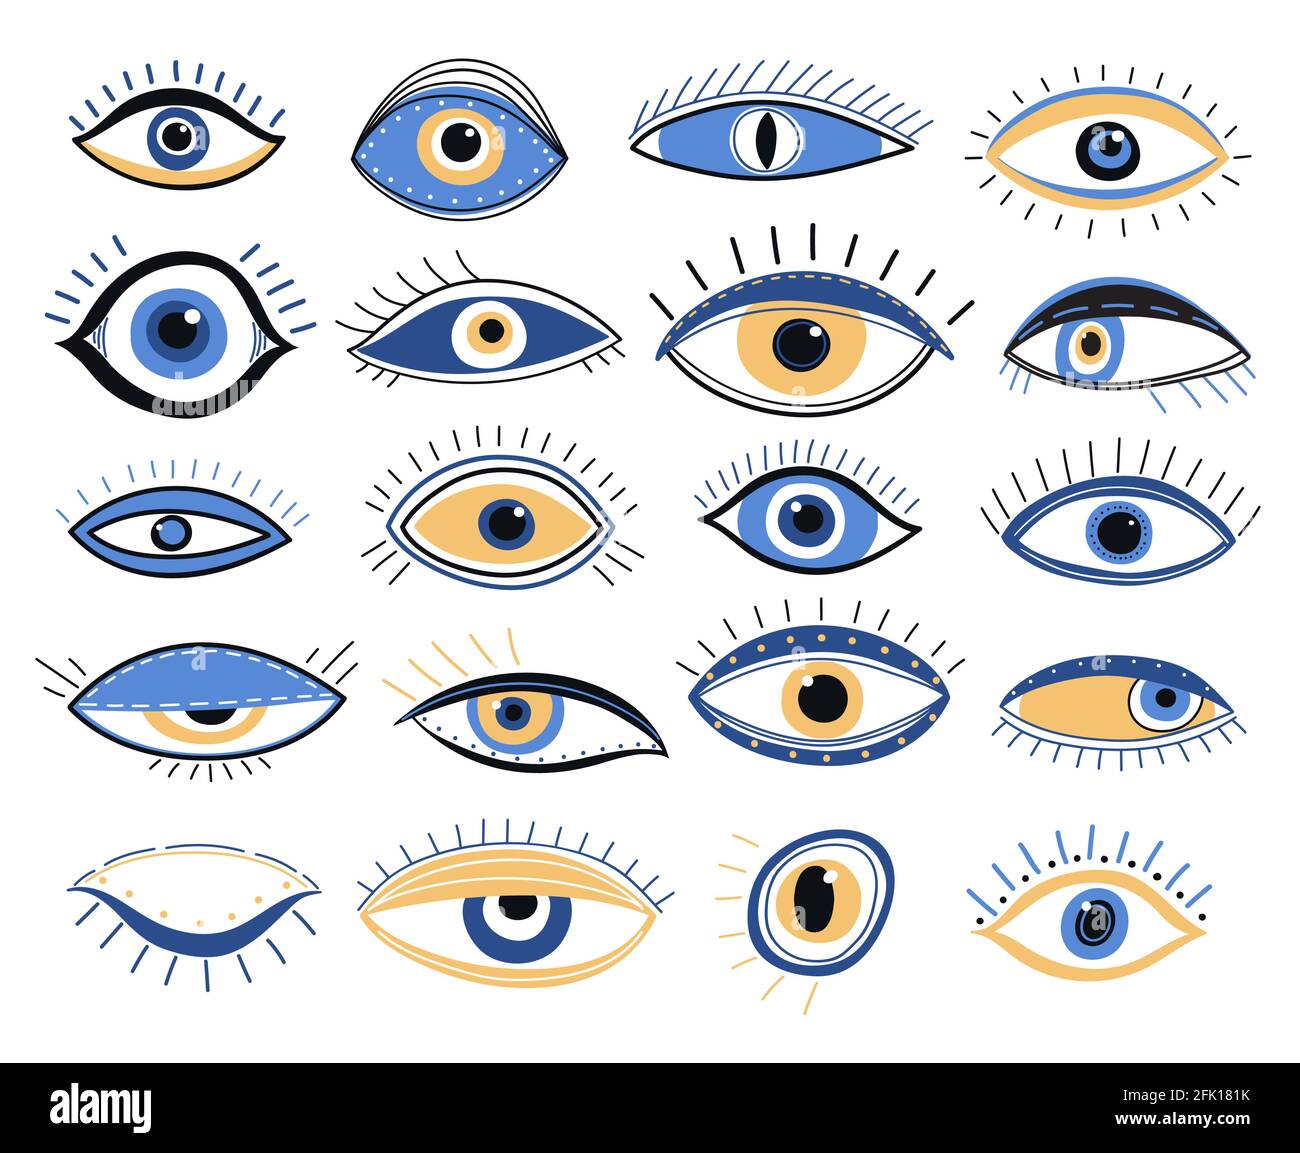 Evil eye. Graphic eyes elements, traditional energy talismans. Magic looking amulet, decorative alchemy occult mystic symbols vector signs Stock Vector